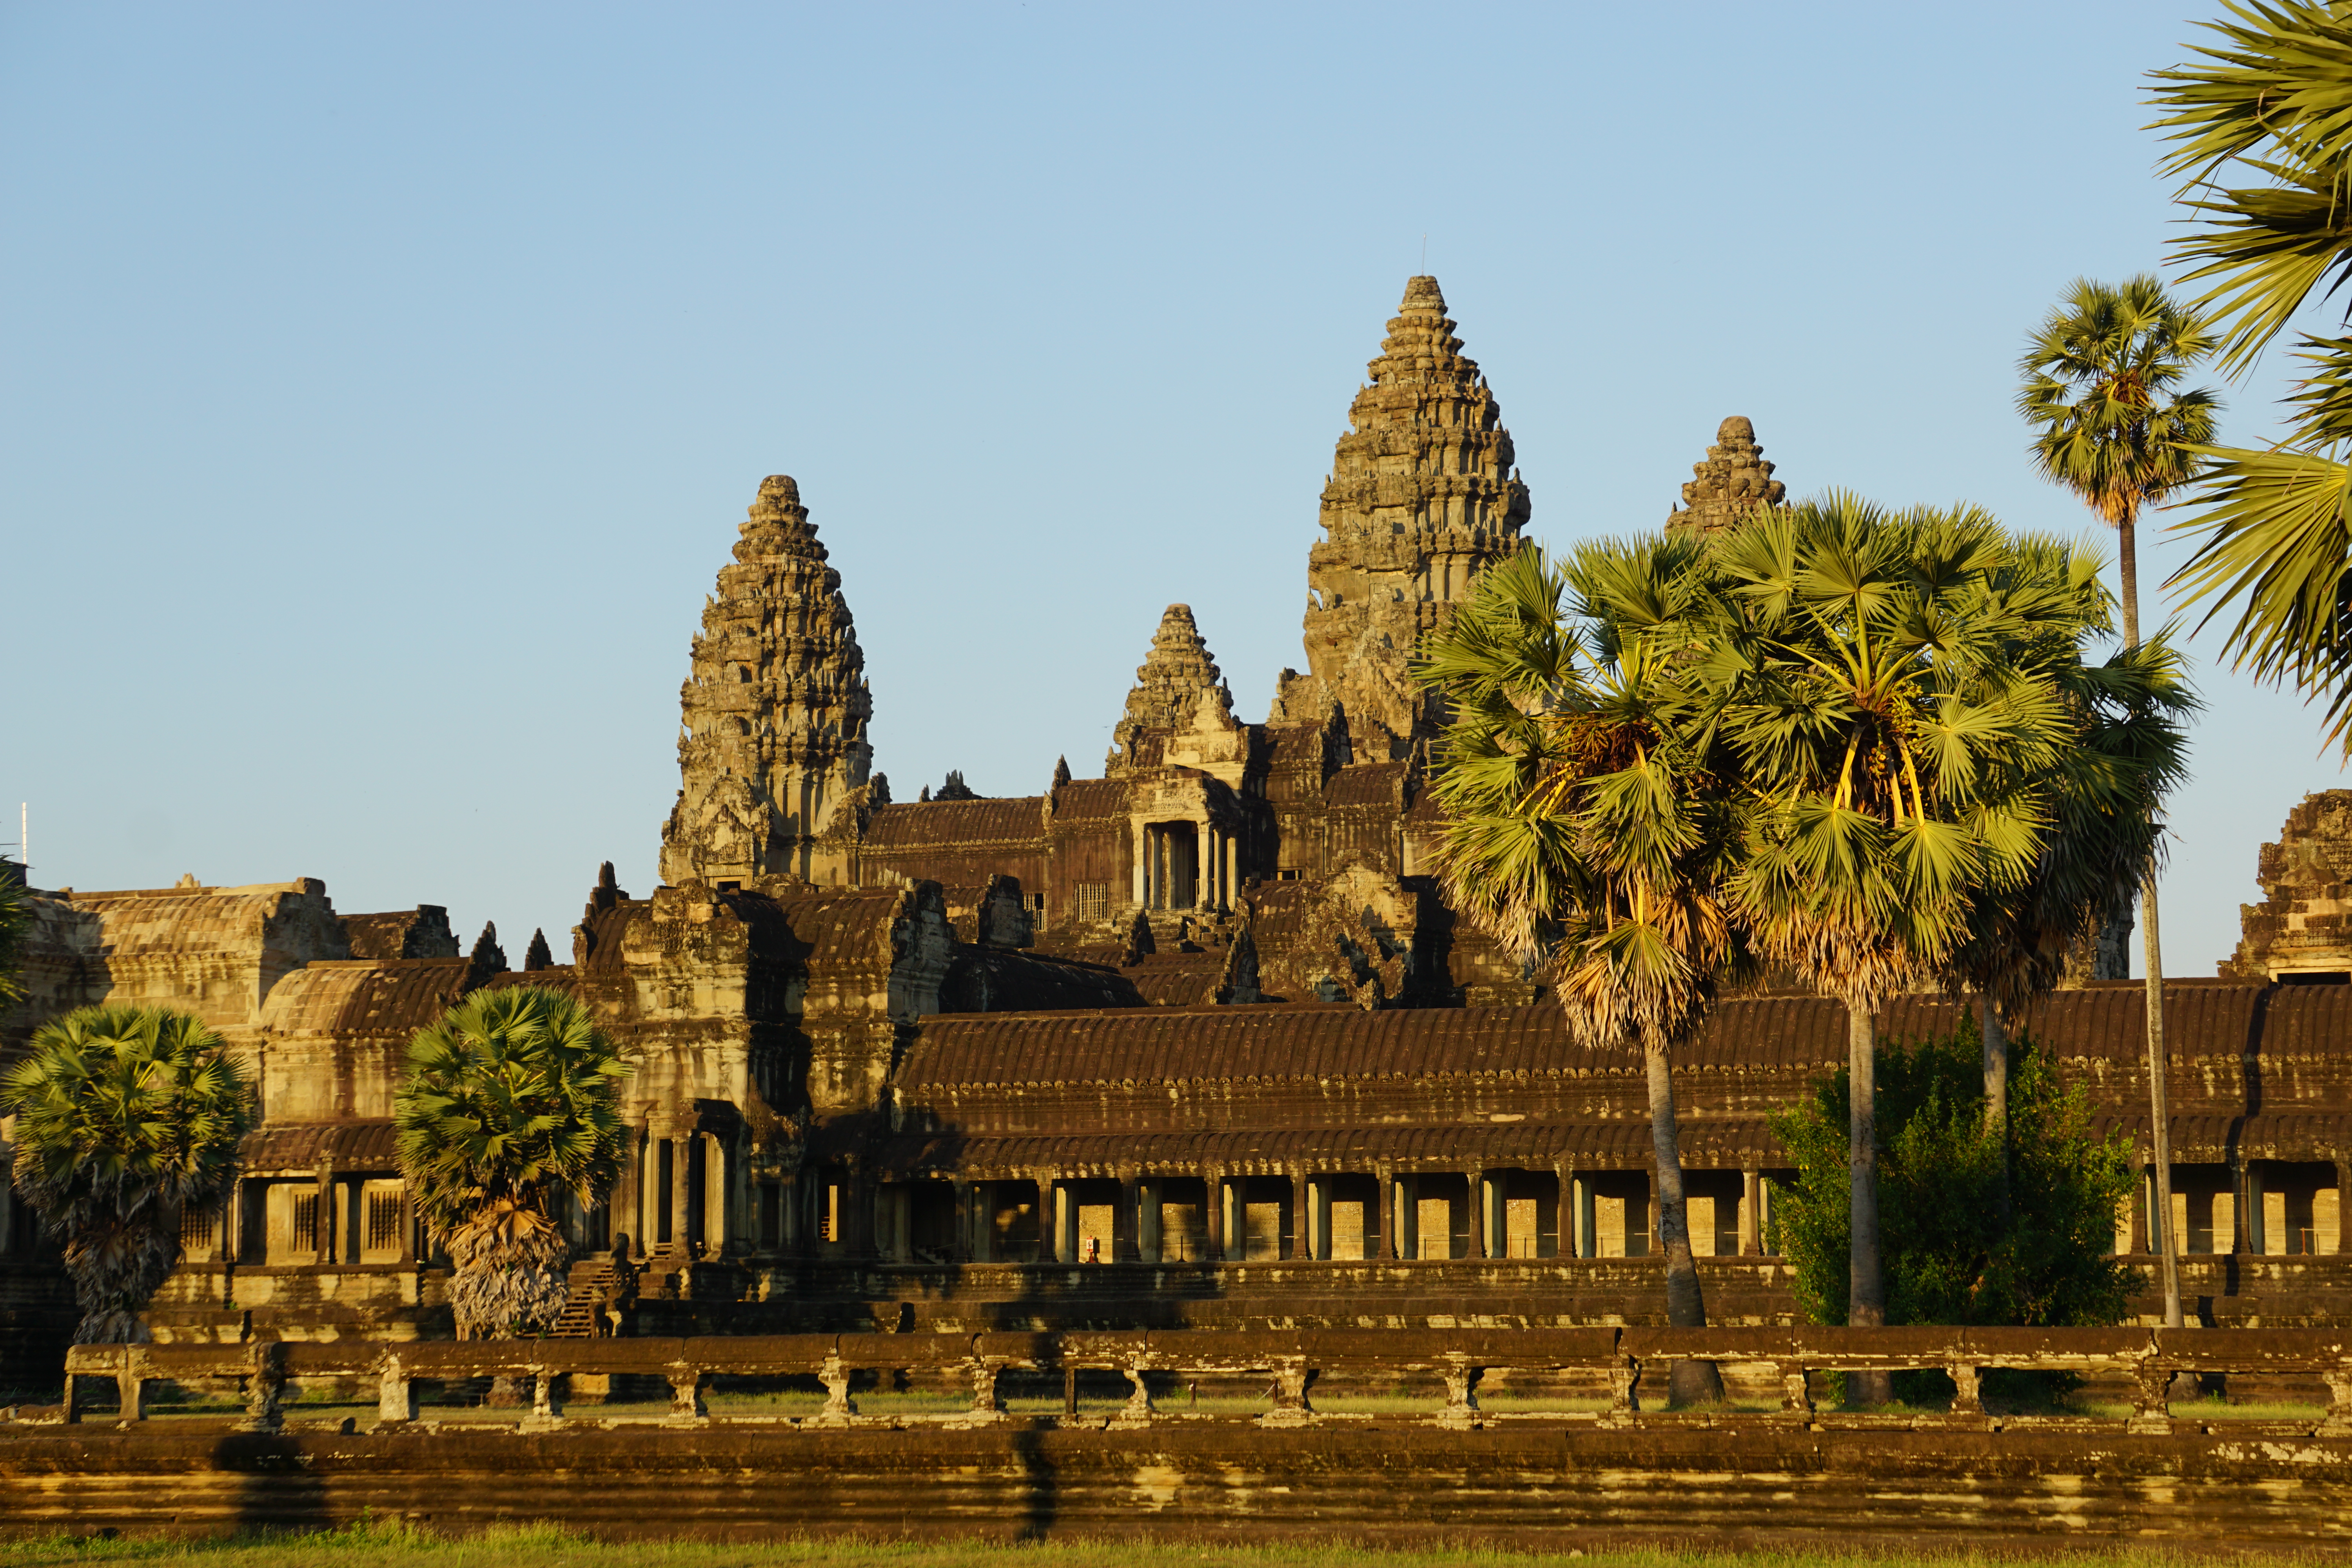 Angkor Wat is a temple complex in Cambodia and the largest religious monument in the world built by the ancient Khmer Empire in the 12th century. (Courtesy)